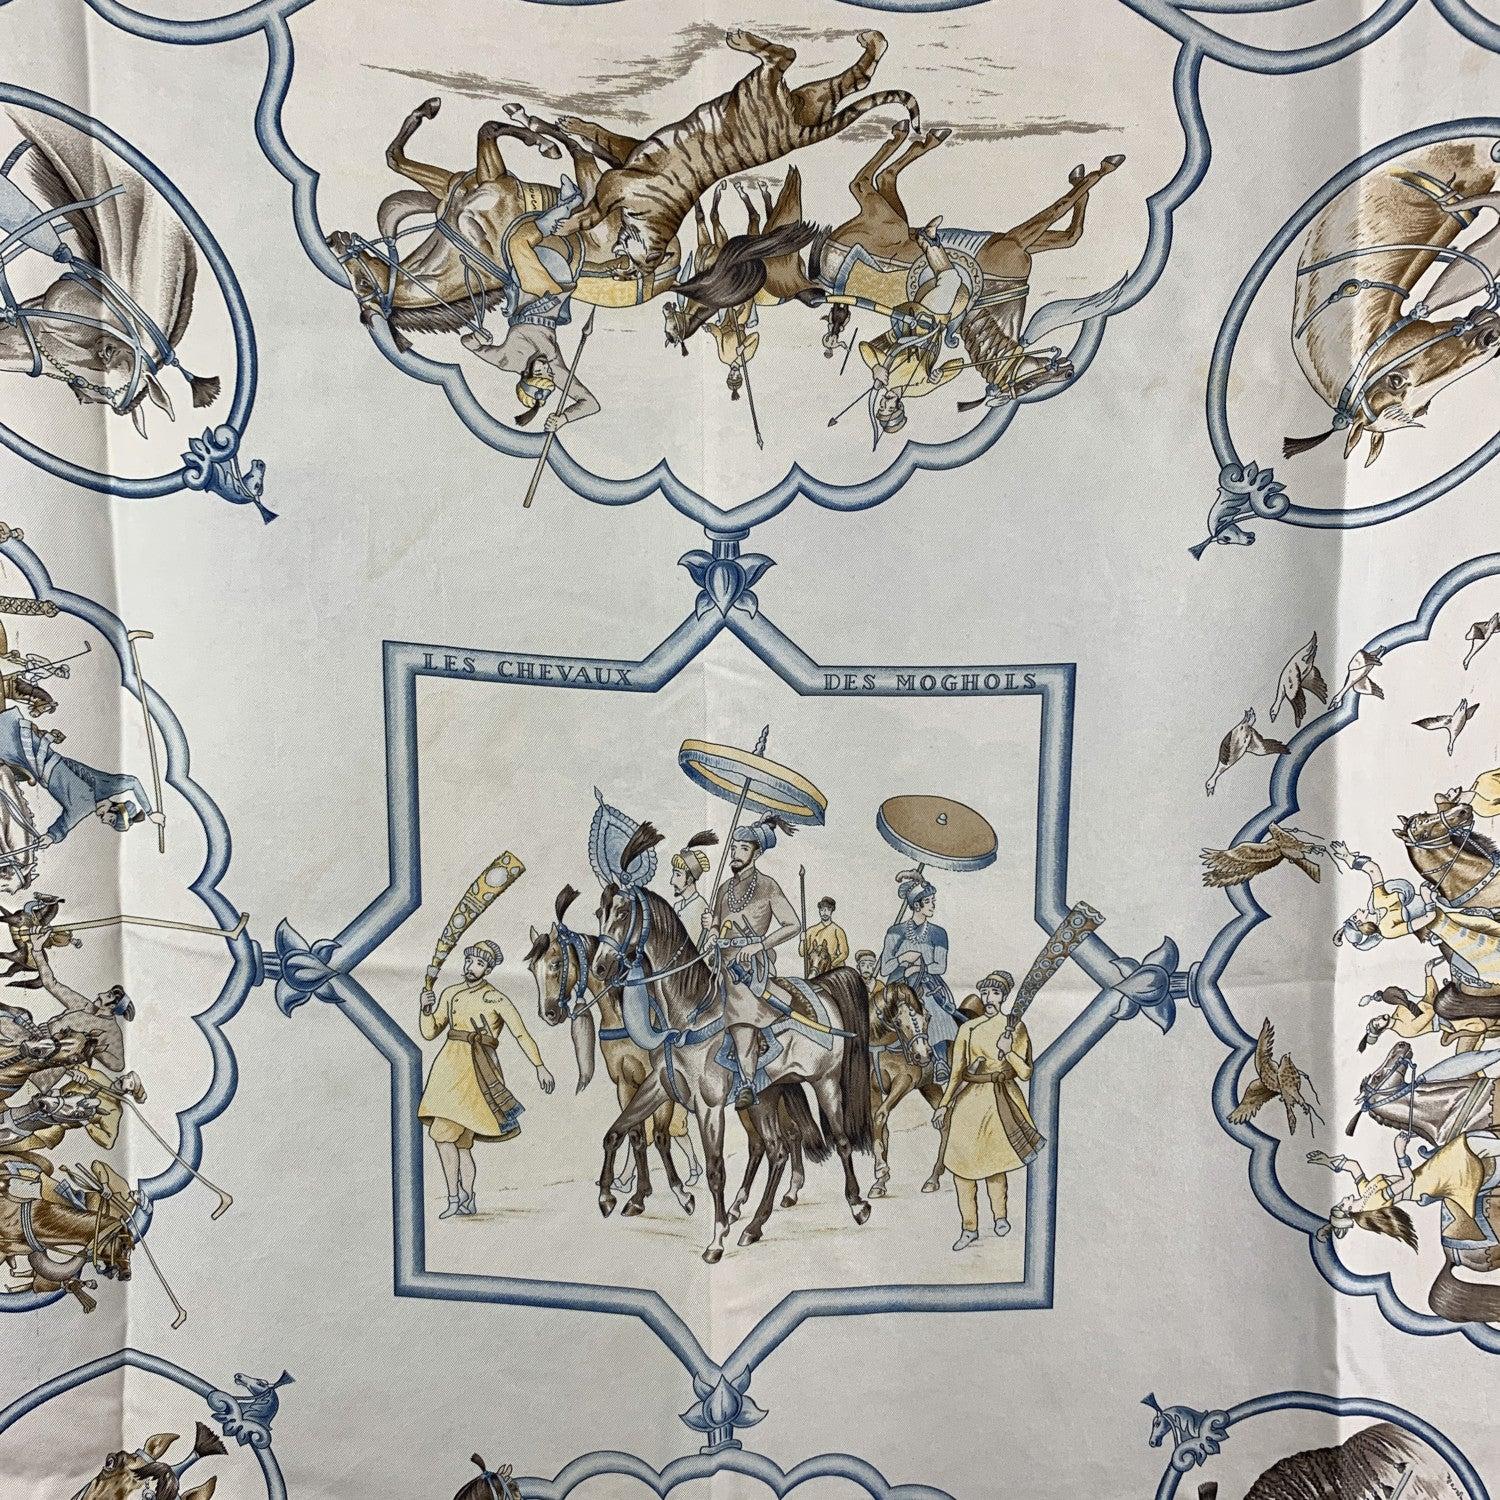 Hermes Paris Silk Scarf 'Les Chevaux de Moghols'. It depicts Mongol horsemen chaperoning their Emperor across the steppes of Central Asia. Artist : Jean De Fougerolle. Year(s) of issue: 1993, 1997/98, 2000, 2005, 2006. The 'HERMES Paris' is located